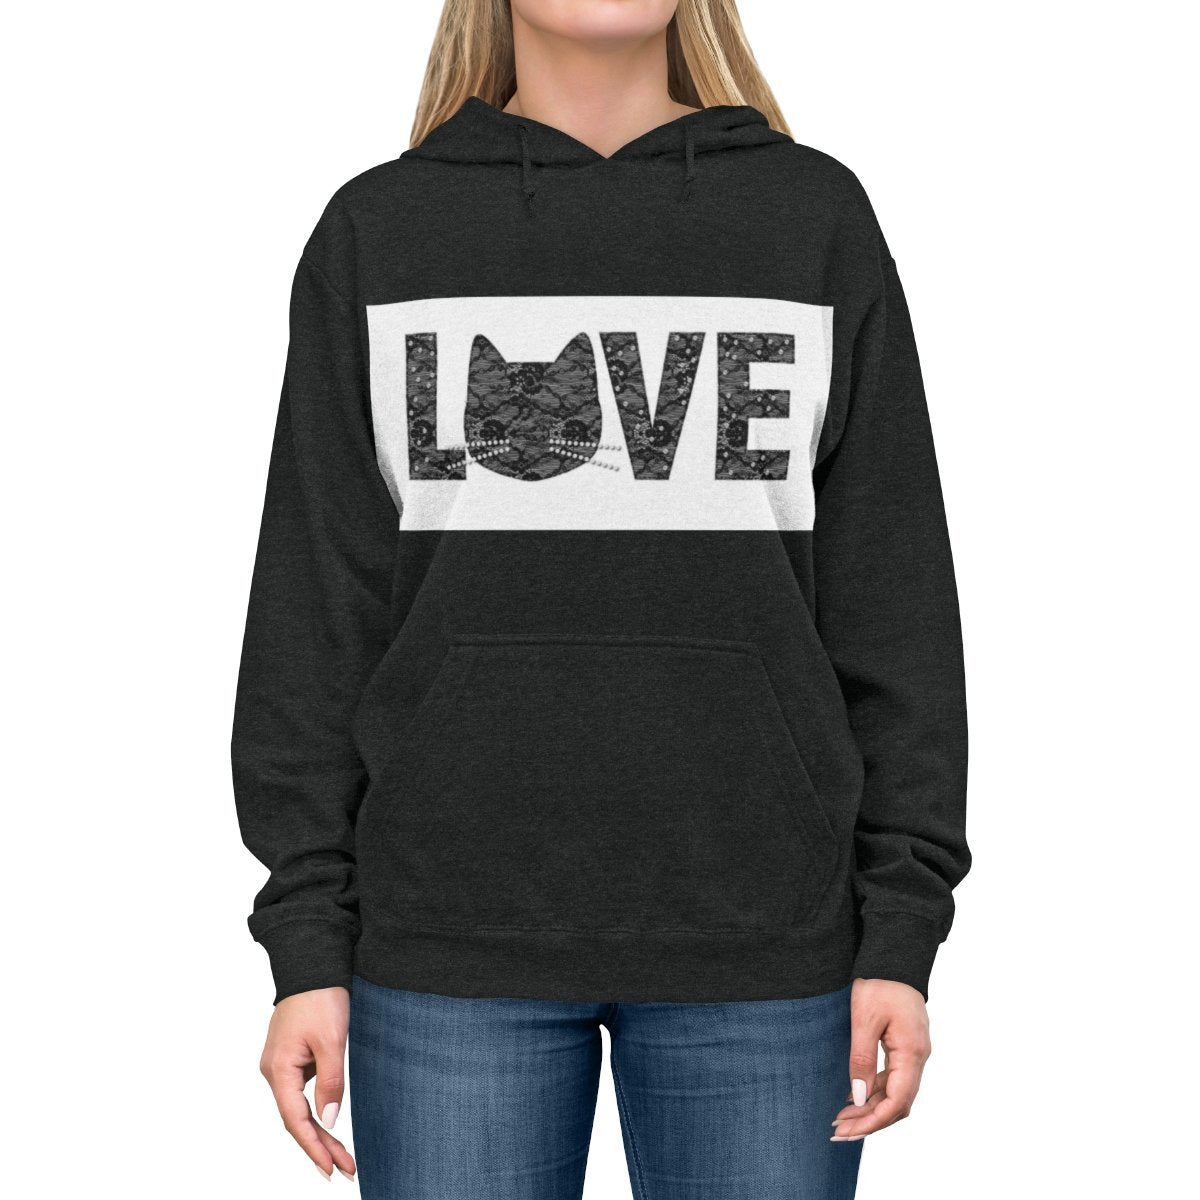 Black cat hoodie featuring the print "Love" across the front.